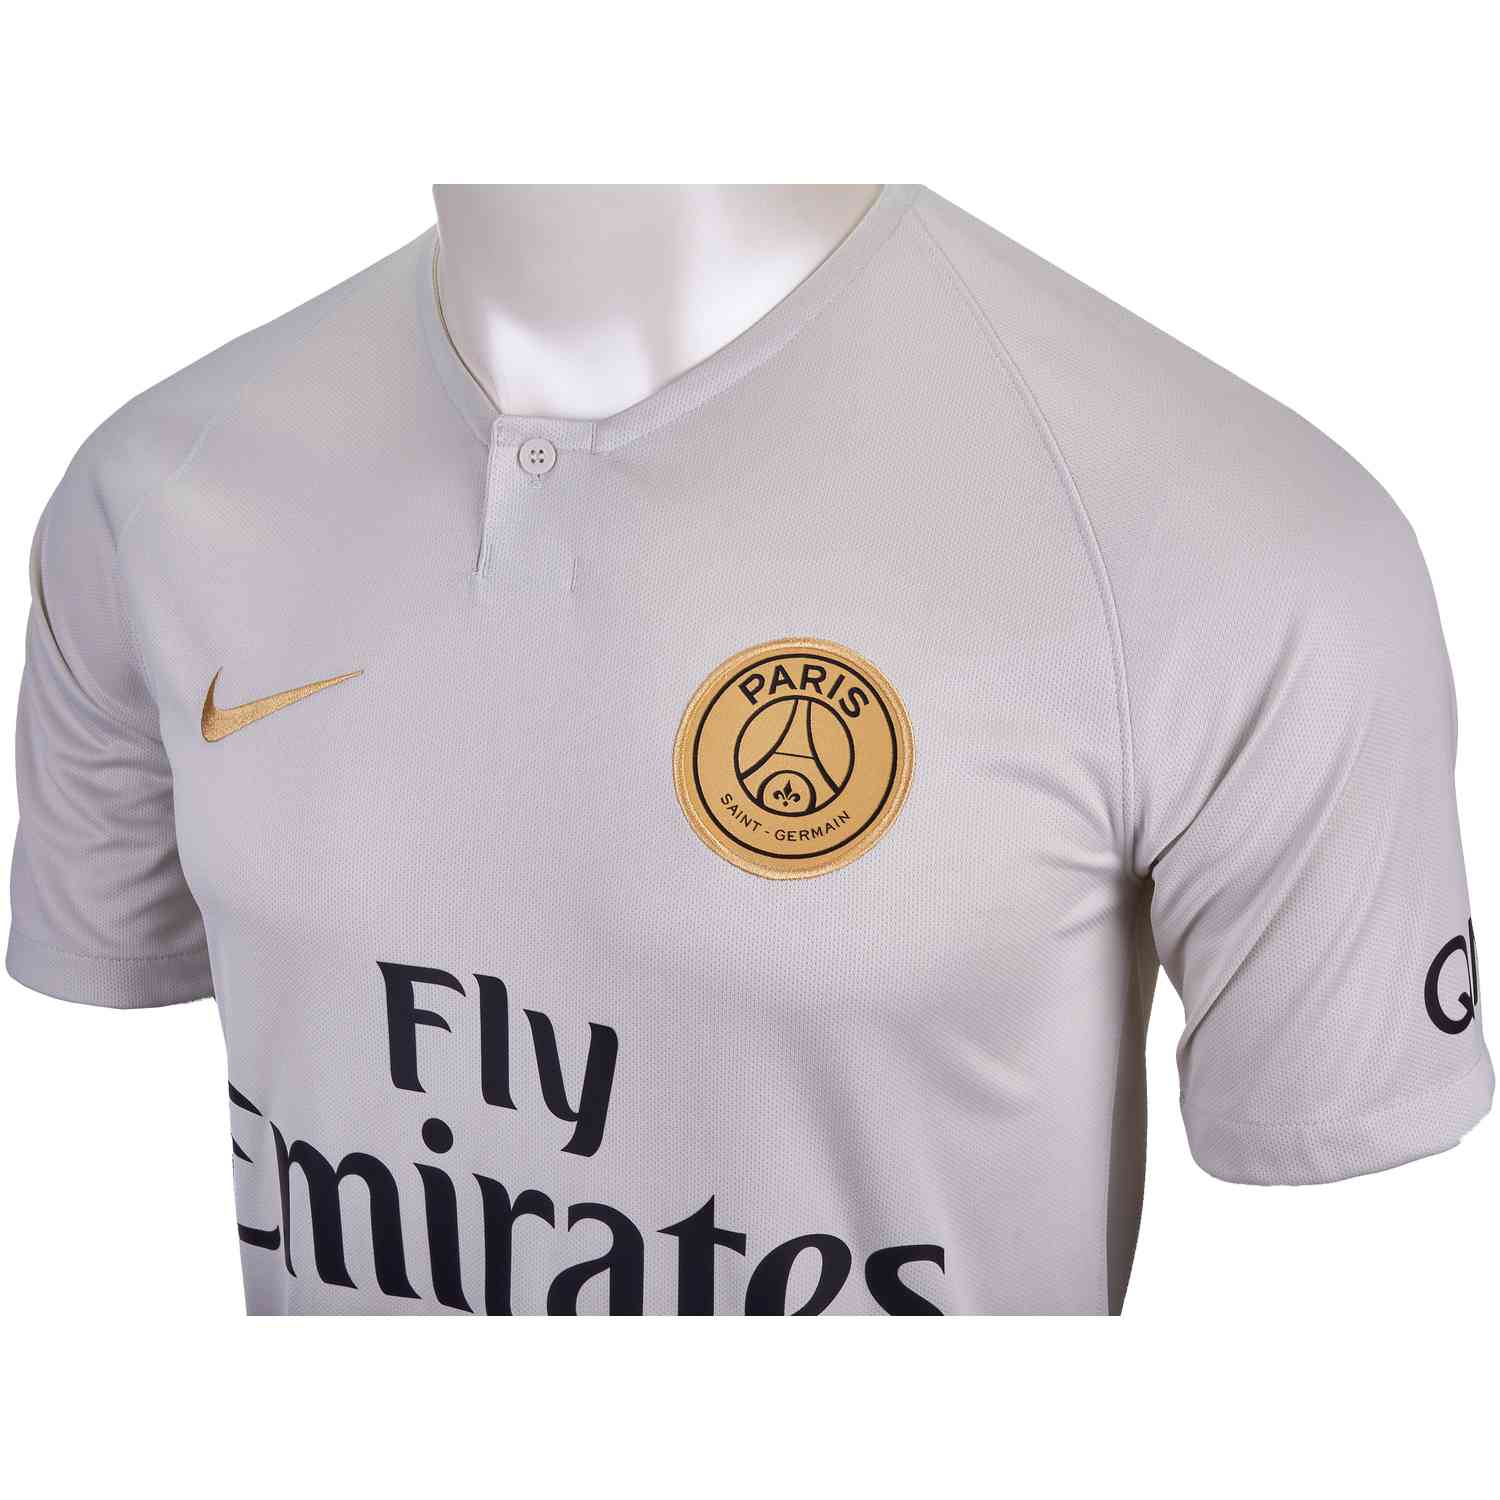 white and gold psg jersey